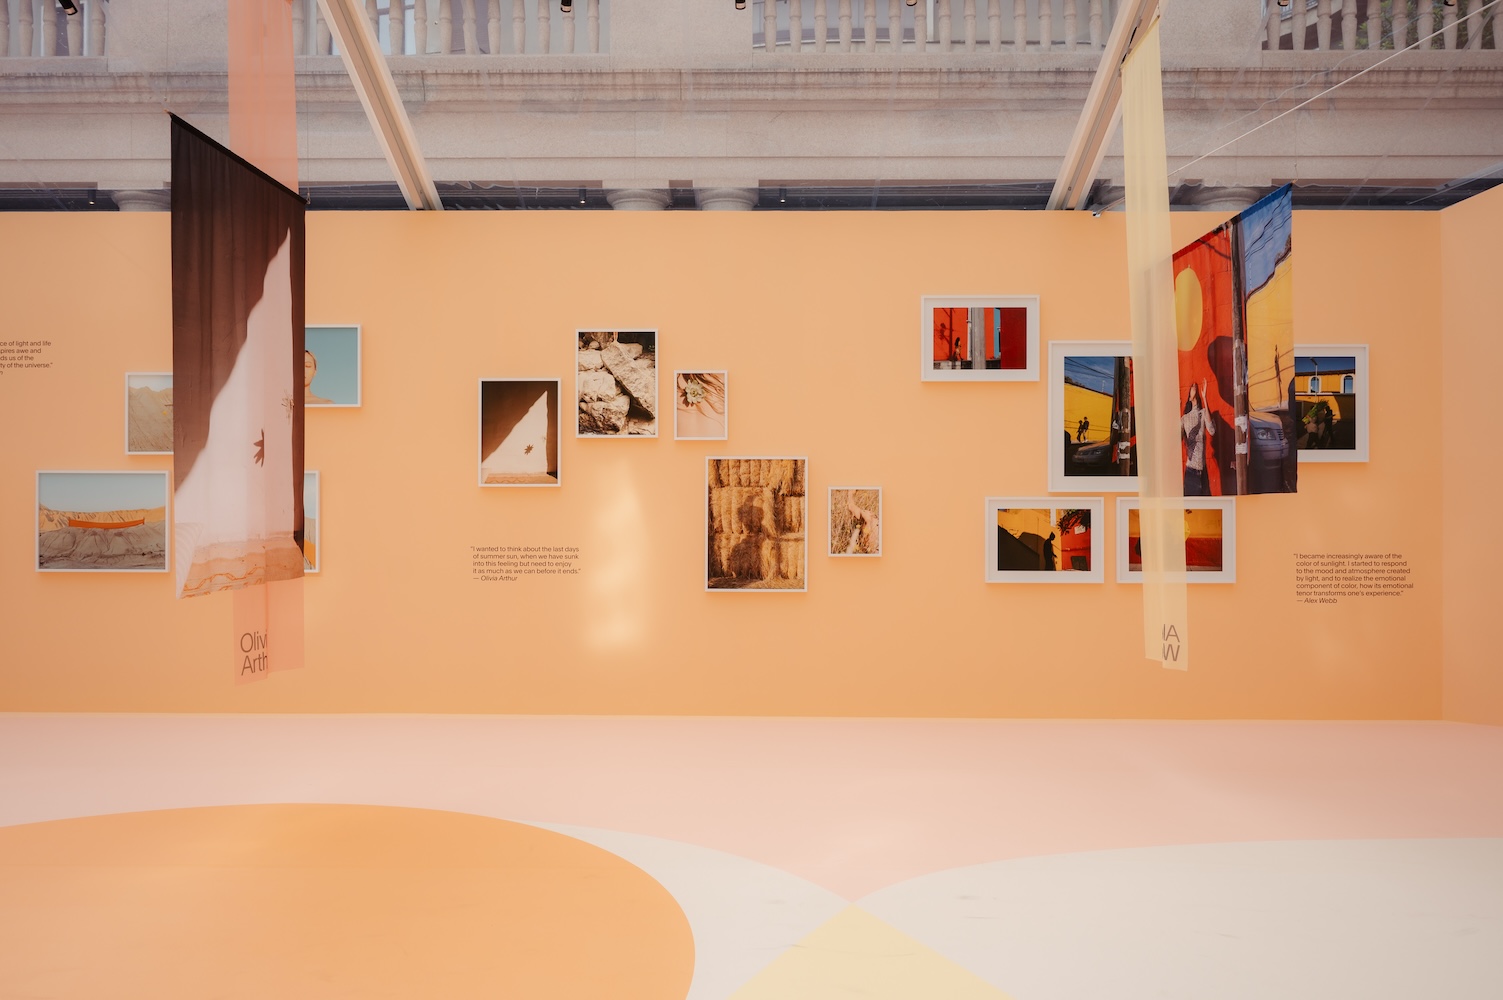 Veuve Clicquot and Magnum Photos unveiled “Emotions of the Sun” at Milan Design Week